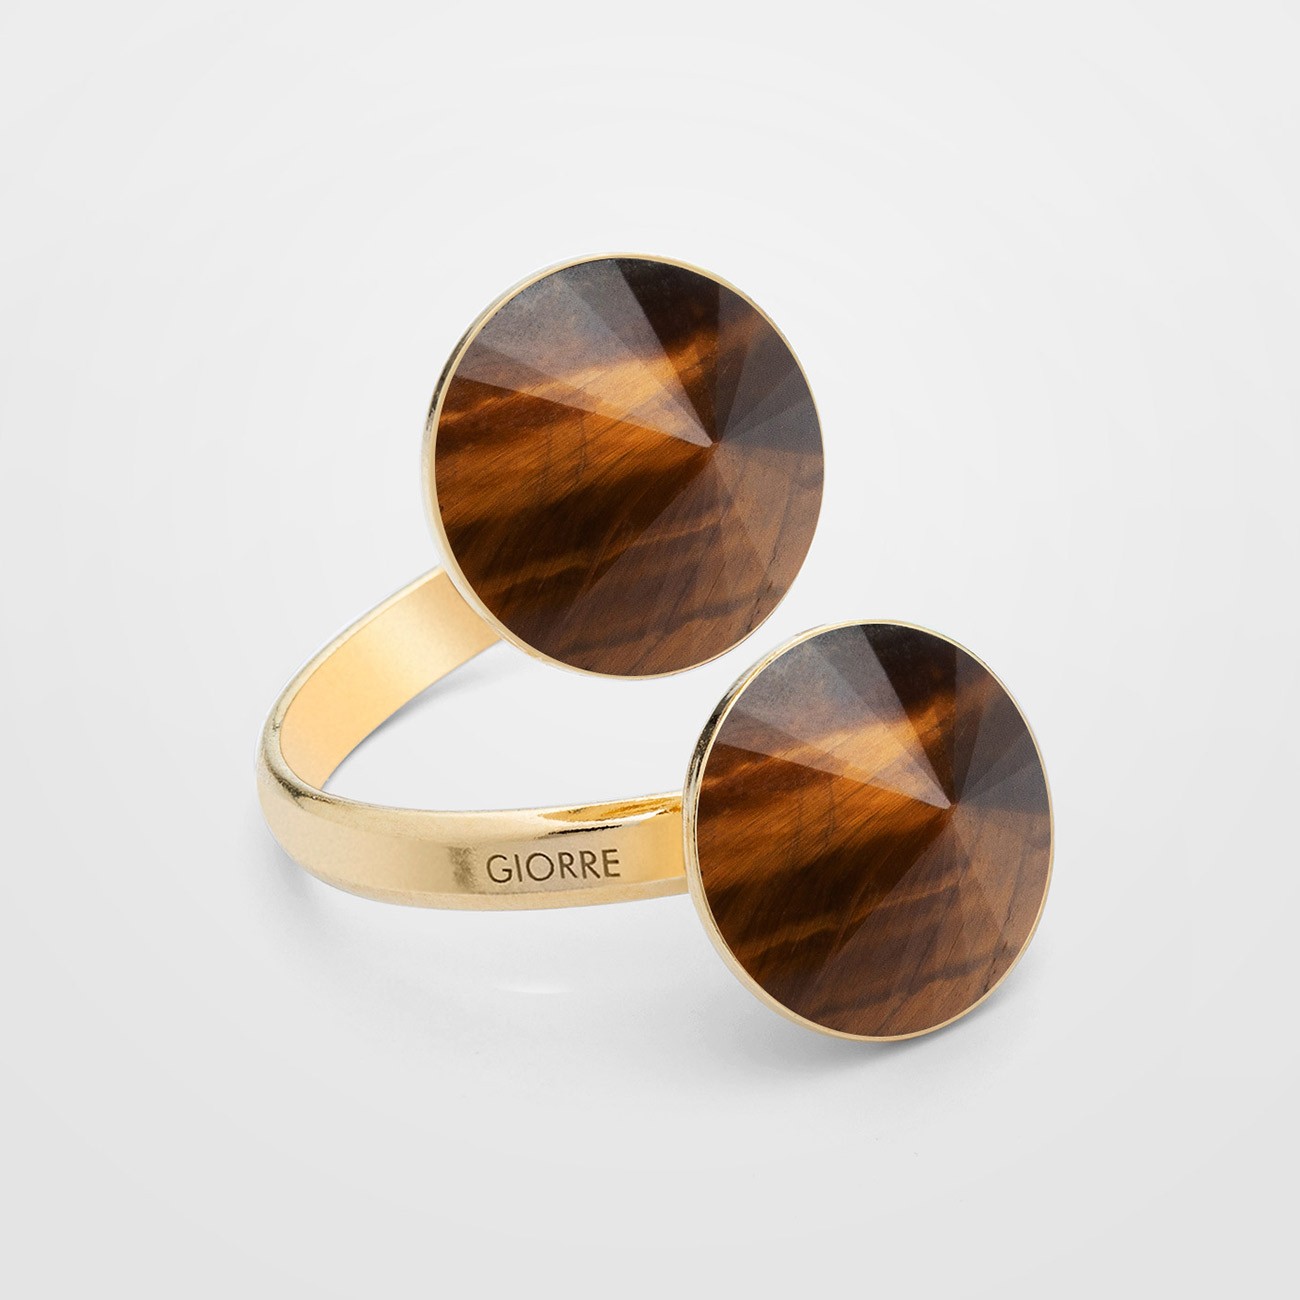 Universal ring with two round natural stones, tiger eye, 925